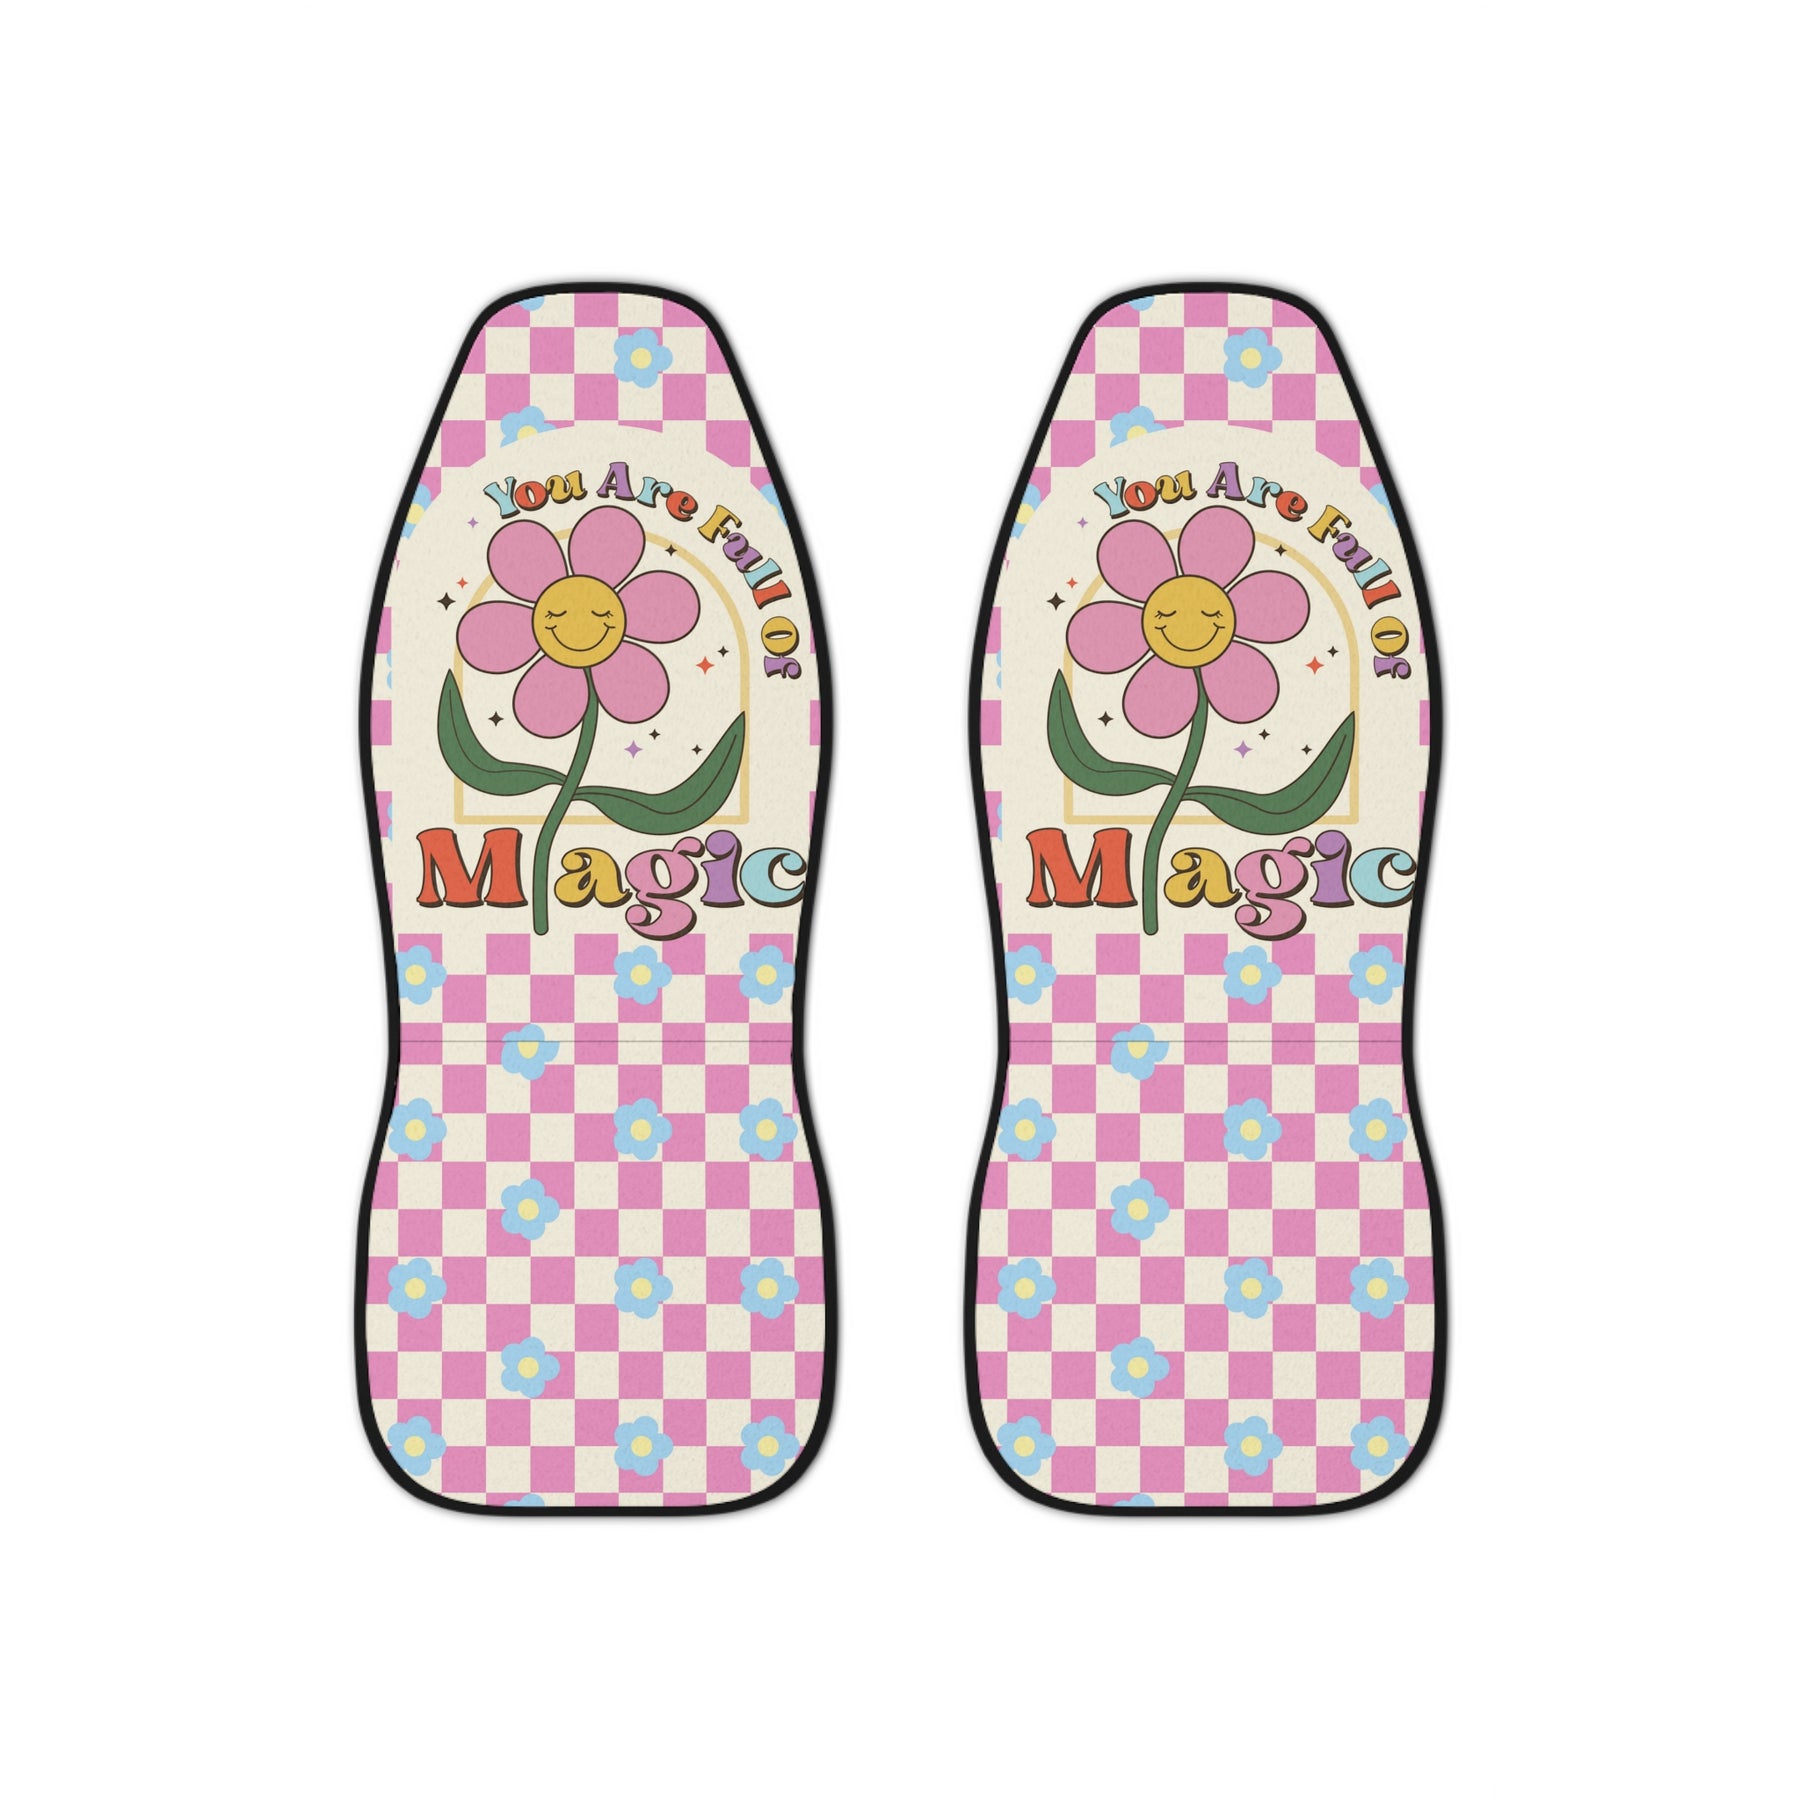 Good Vibes Pink Boho Car Seat Covers Set of 2, Aesthetic Y2K Groovy Floral Car Seat,New Car Gift,Y2K Retro Vintage car accessory for women